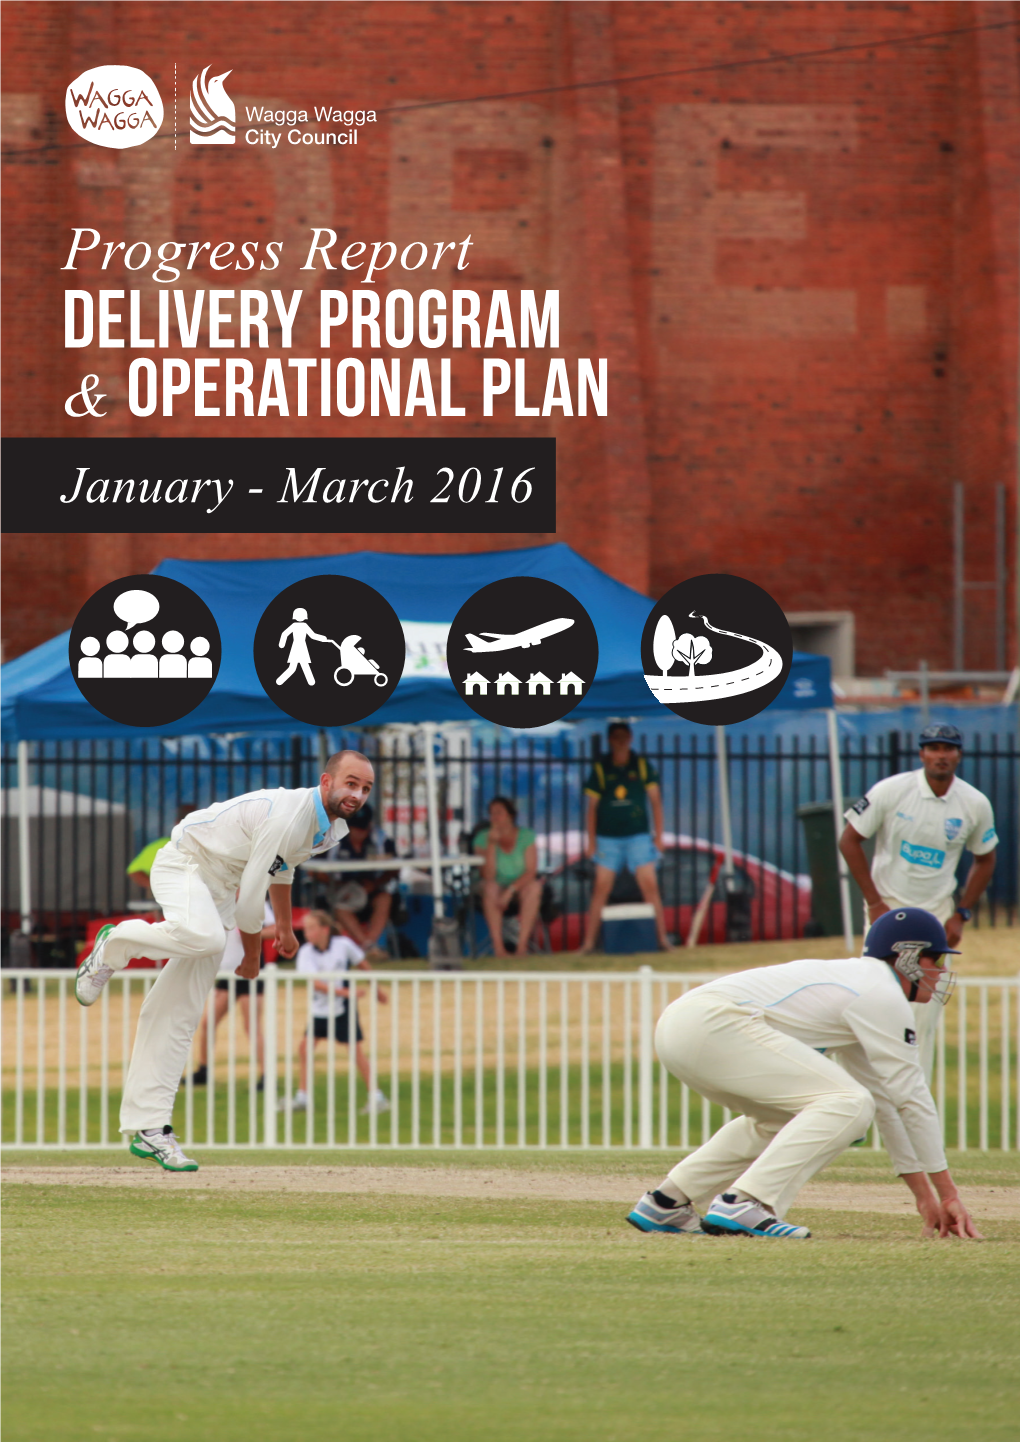 DELIVERY PROGRAM & Operational Plan